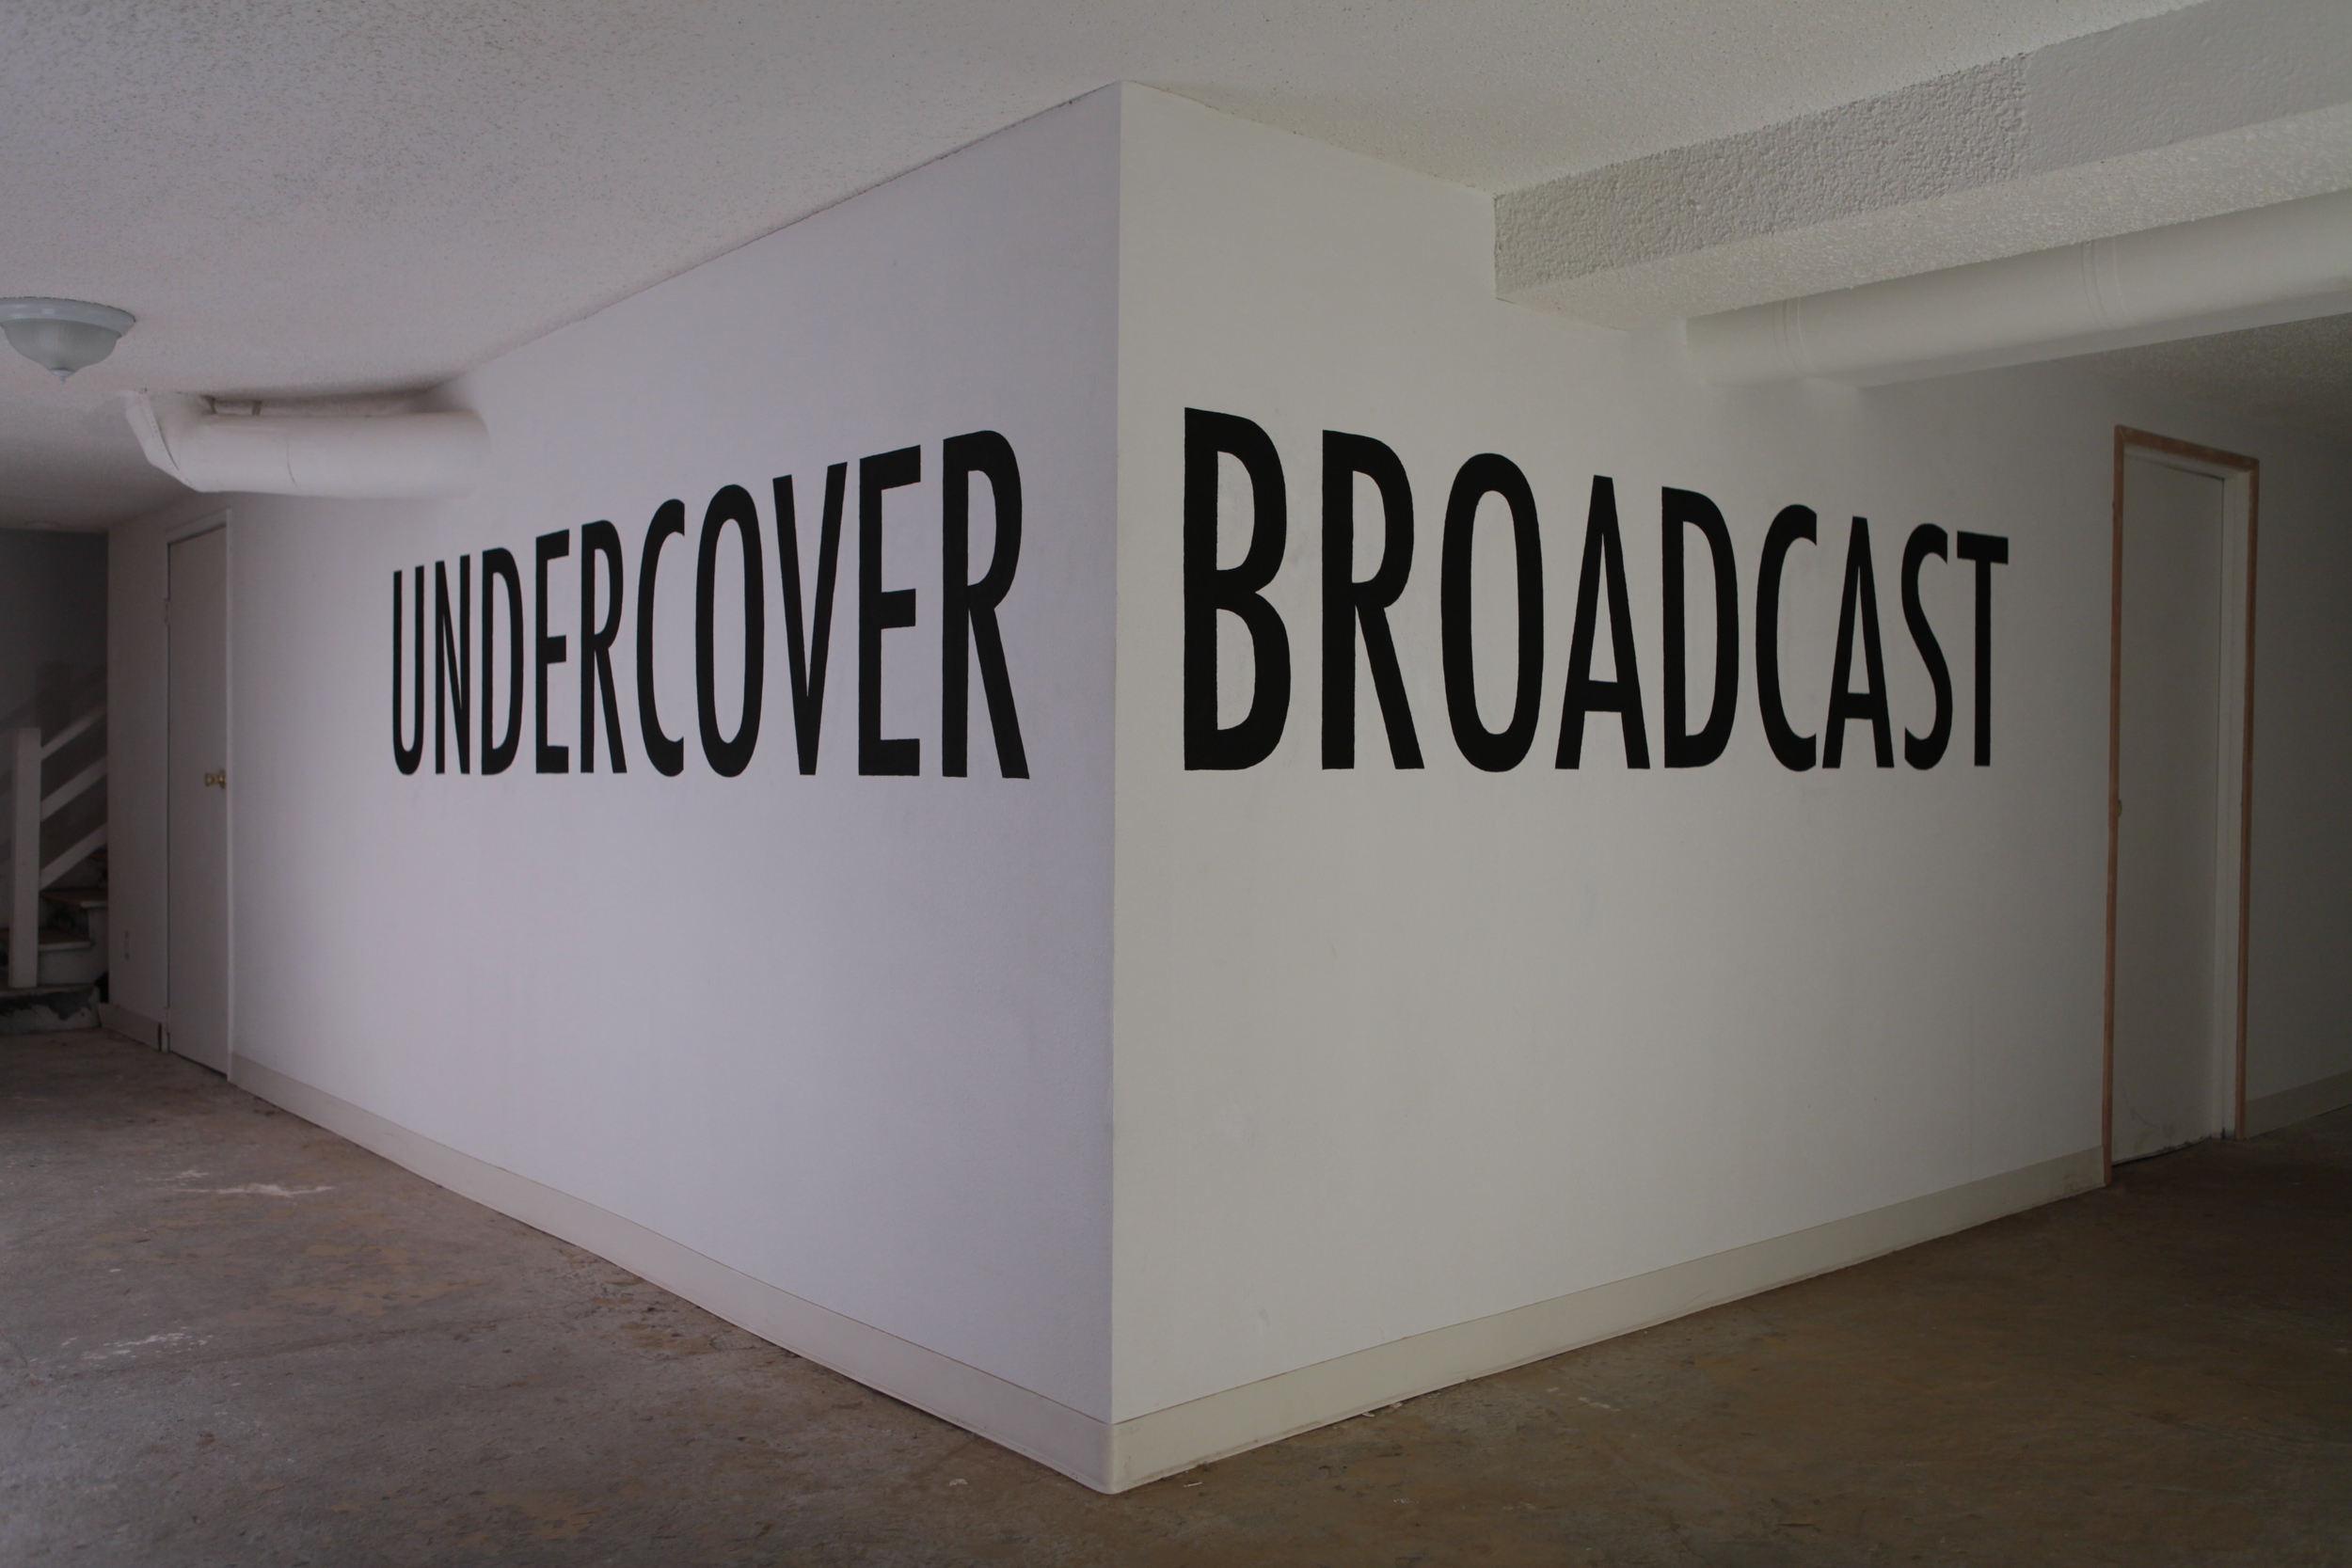   Undercover Broadcast   Installation view  The Bunker Gallery, Portland, OR  2012 